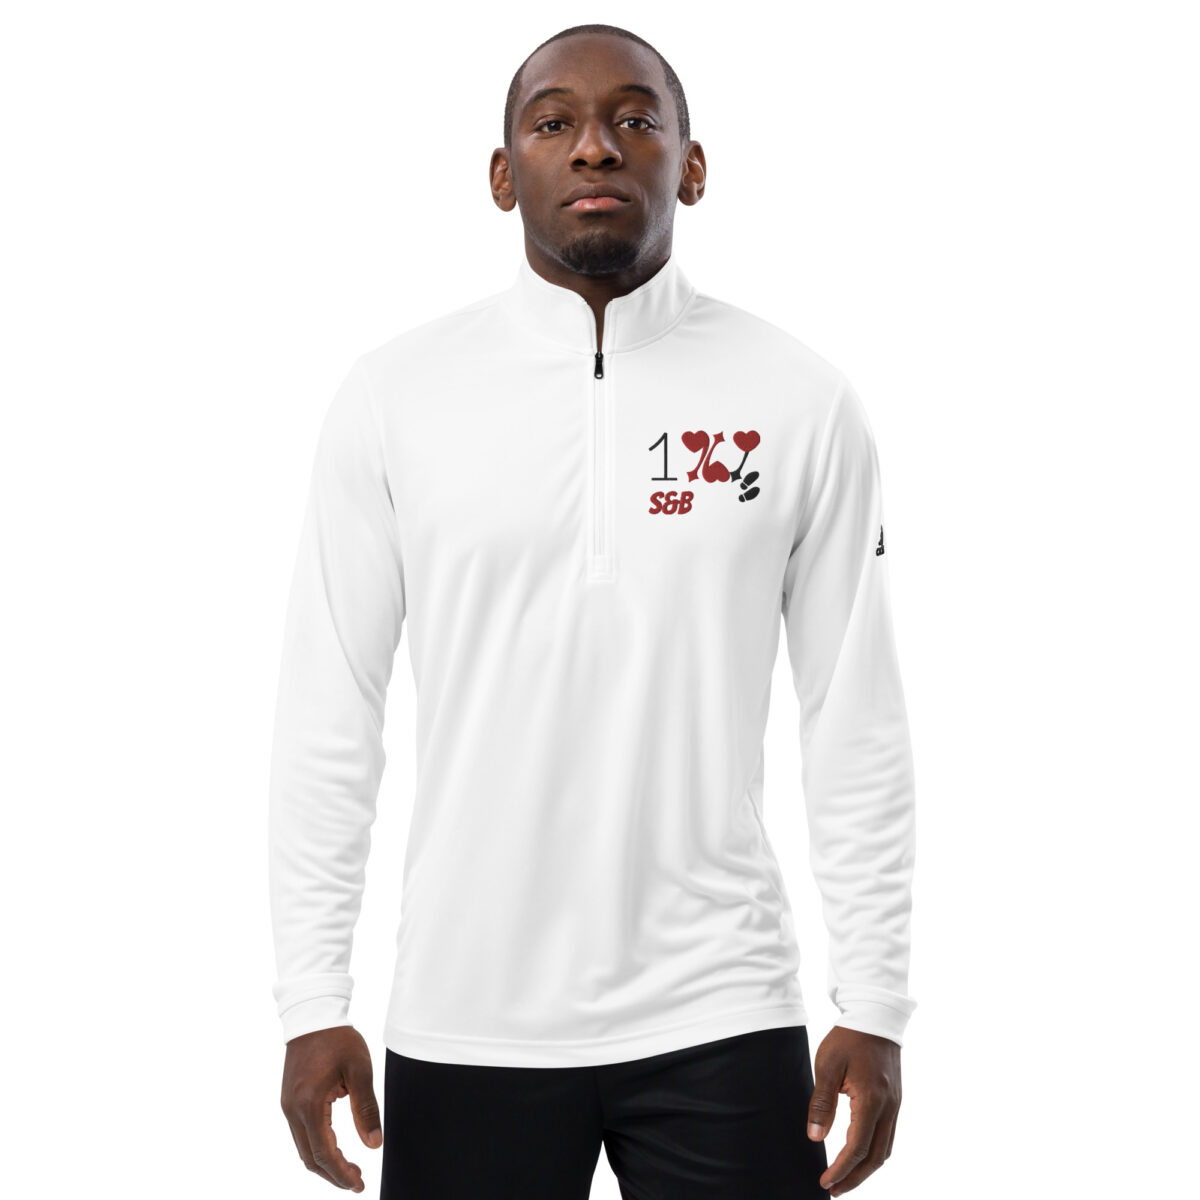 adidas-quarter-zip-pullover-white-front-653afd4311318-1.jpg